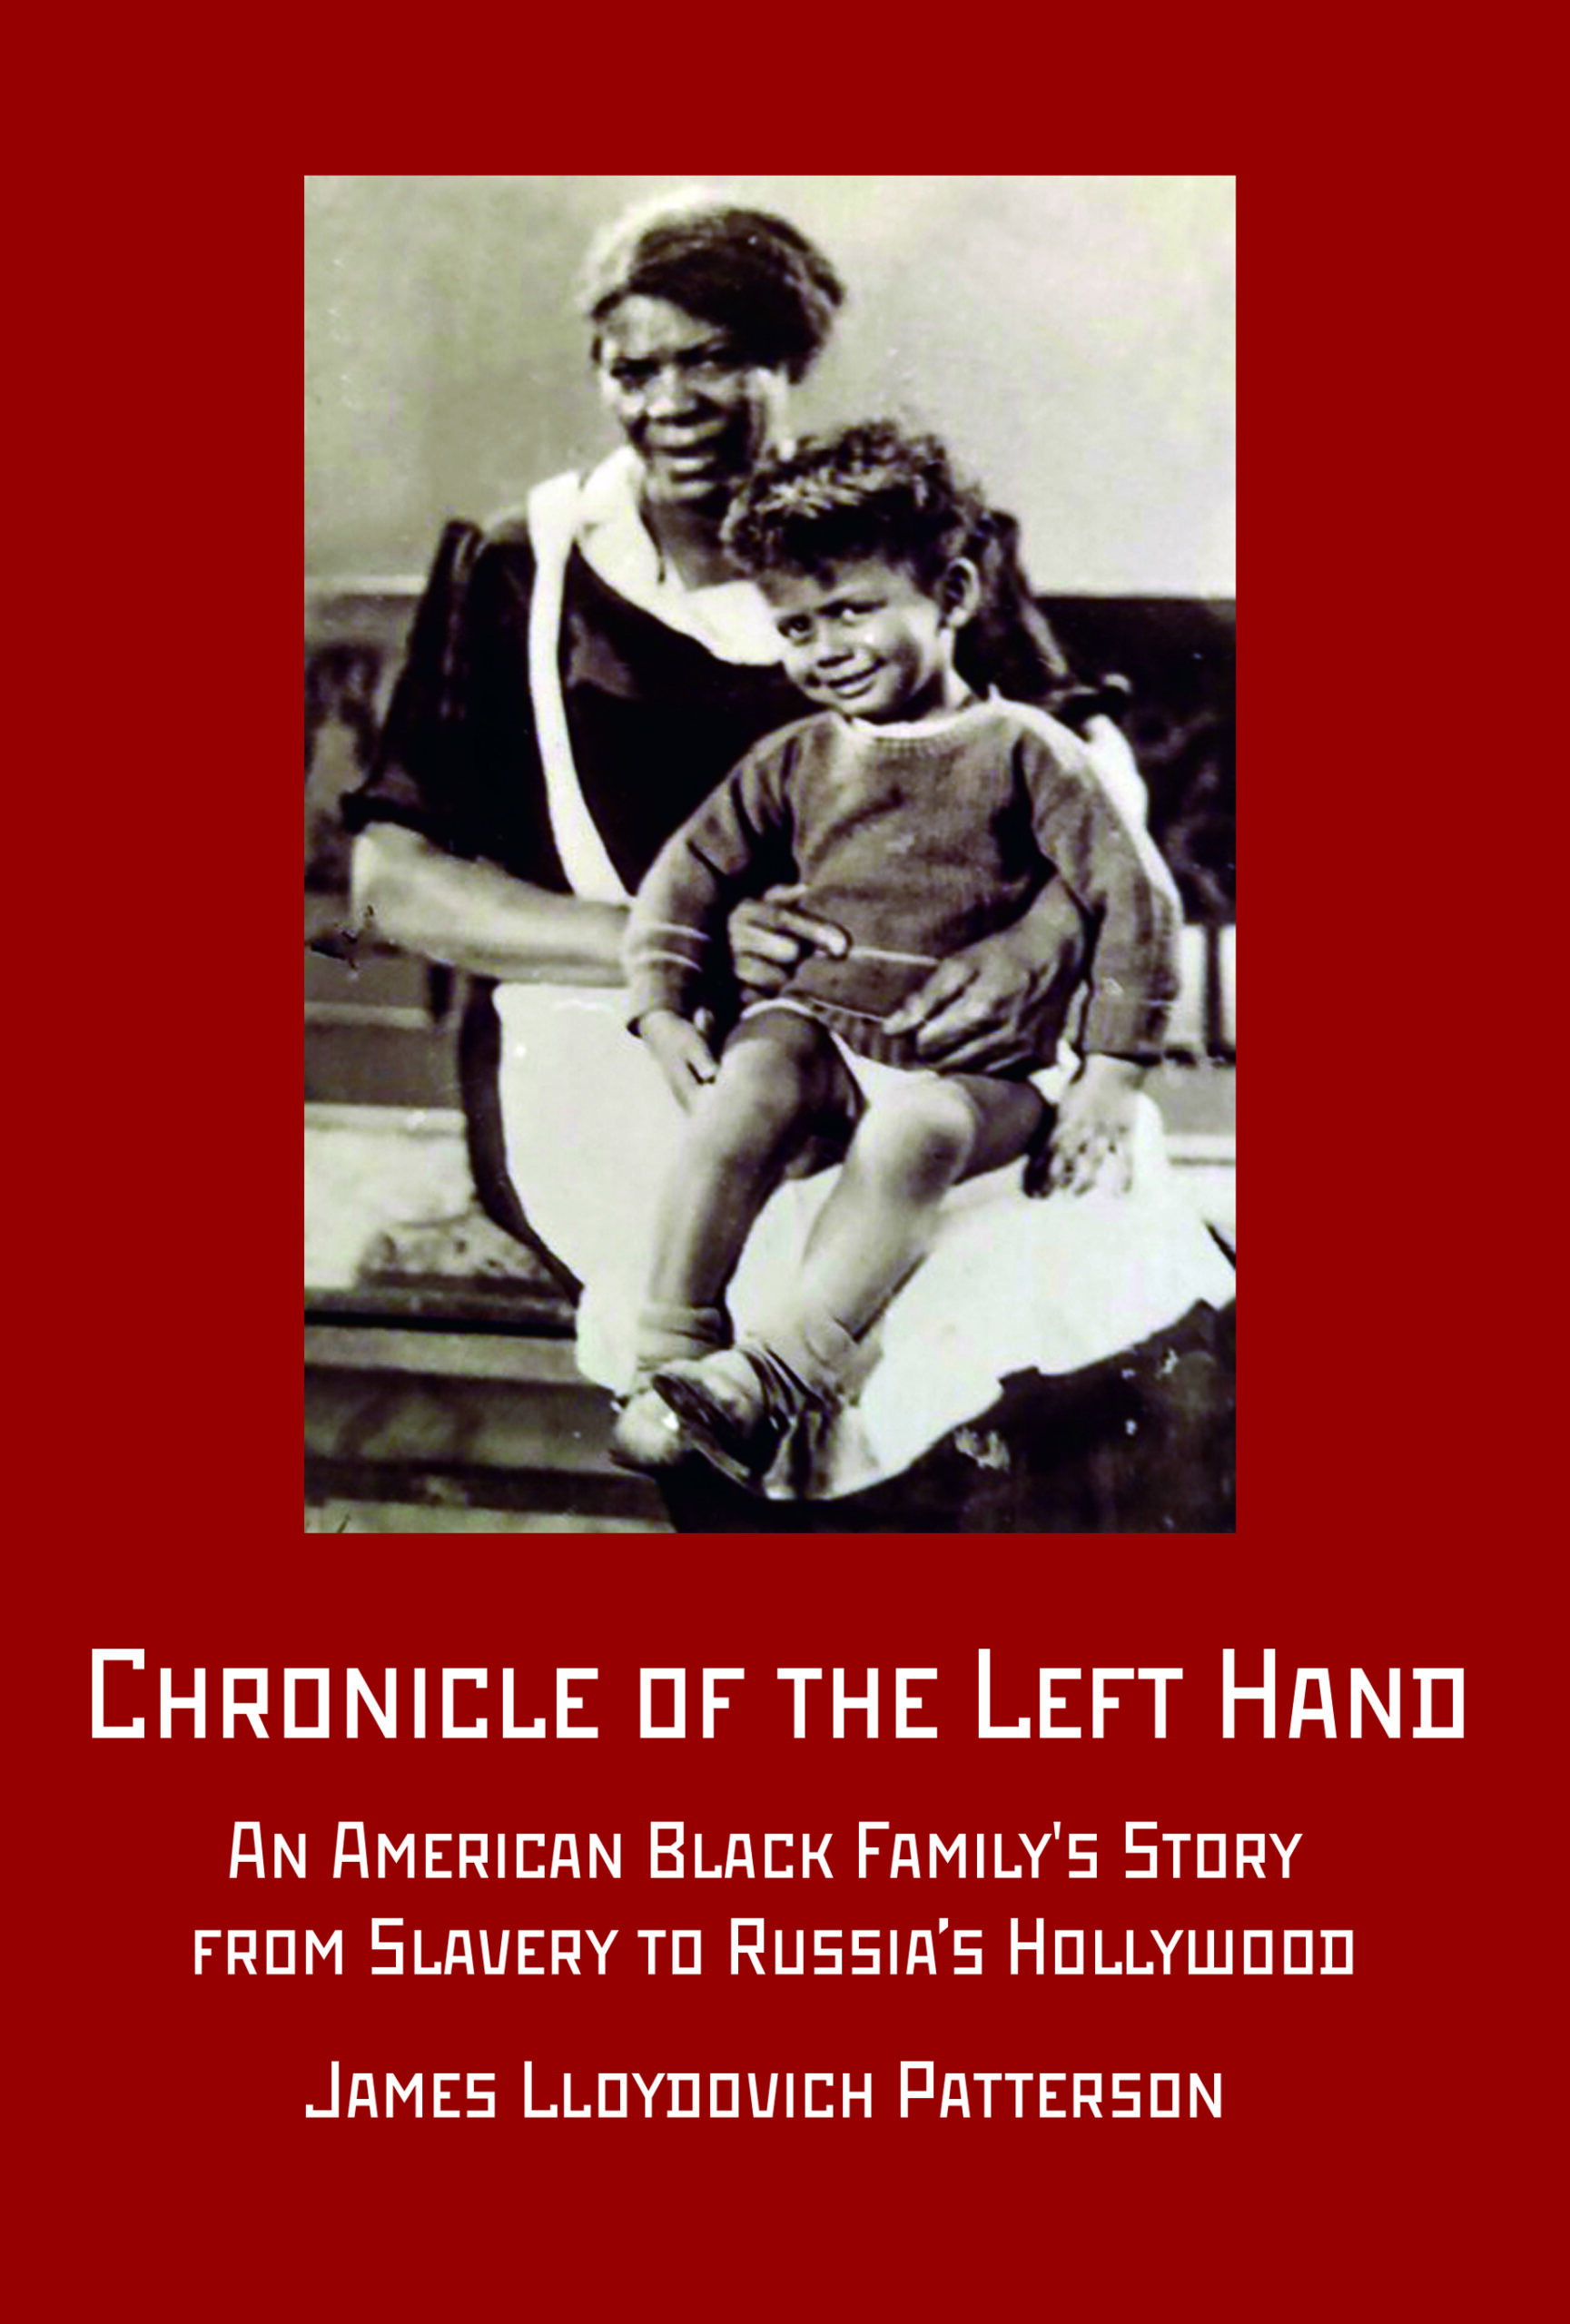 CHRONICLE OF THE LEFT HAND: An American Black Family’s Story from Slavery to Russia’s Hollywood